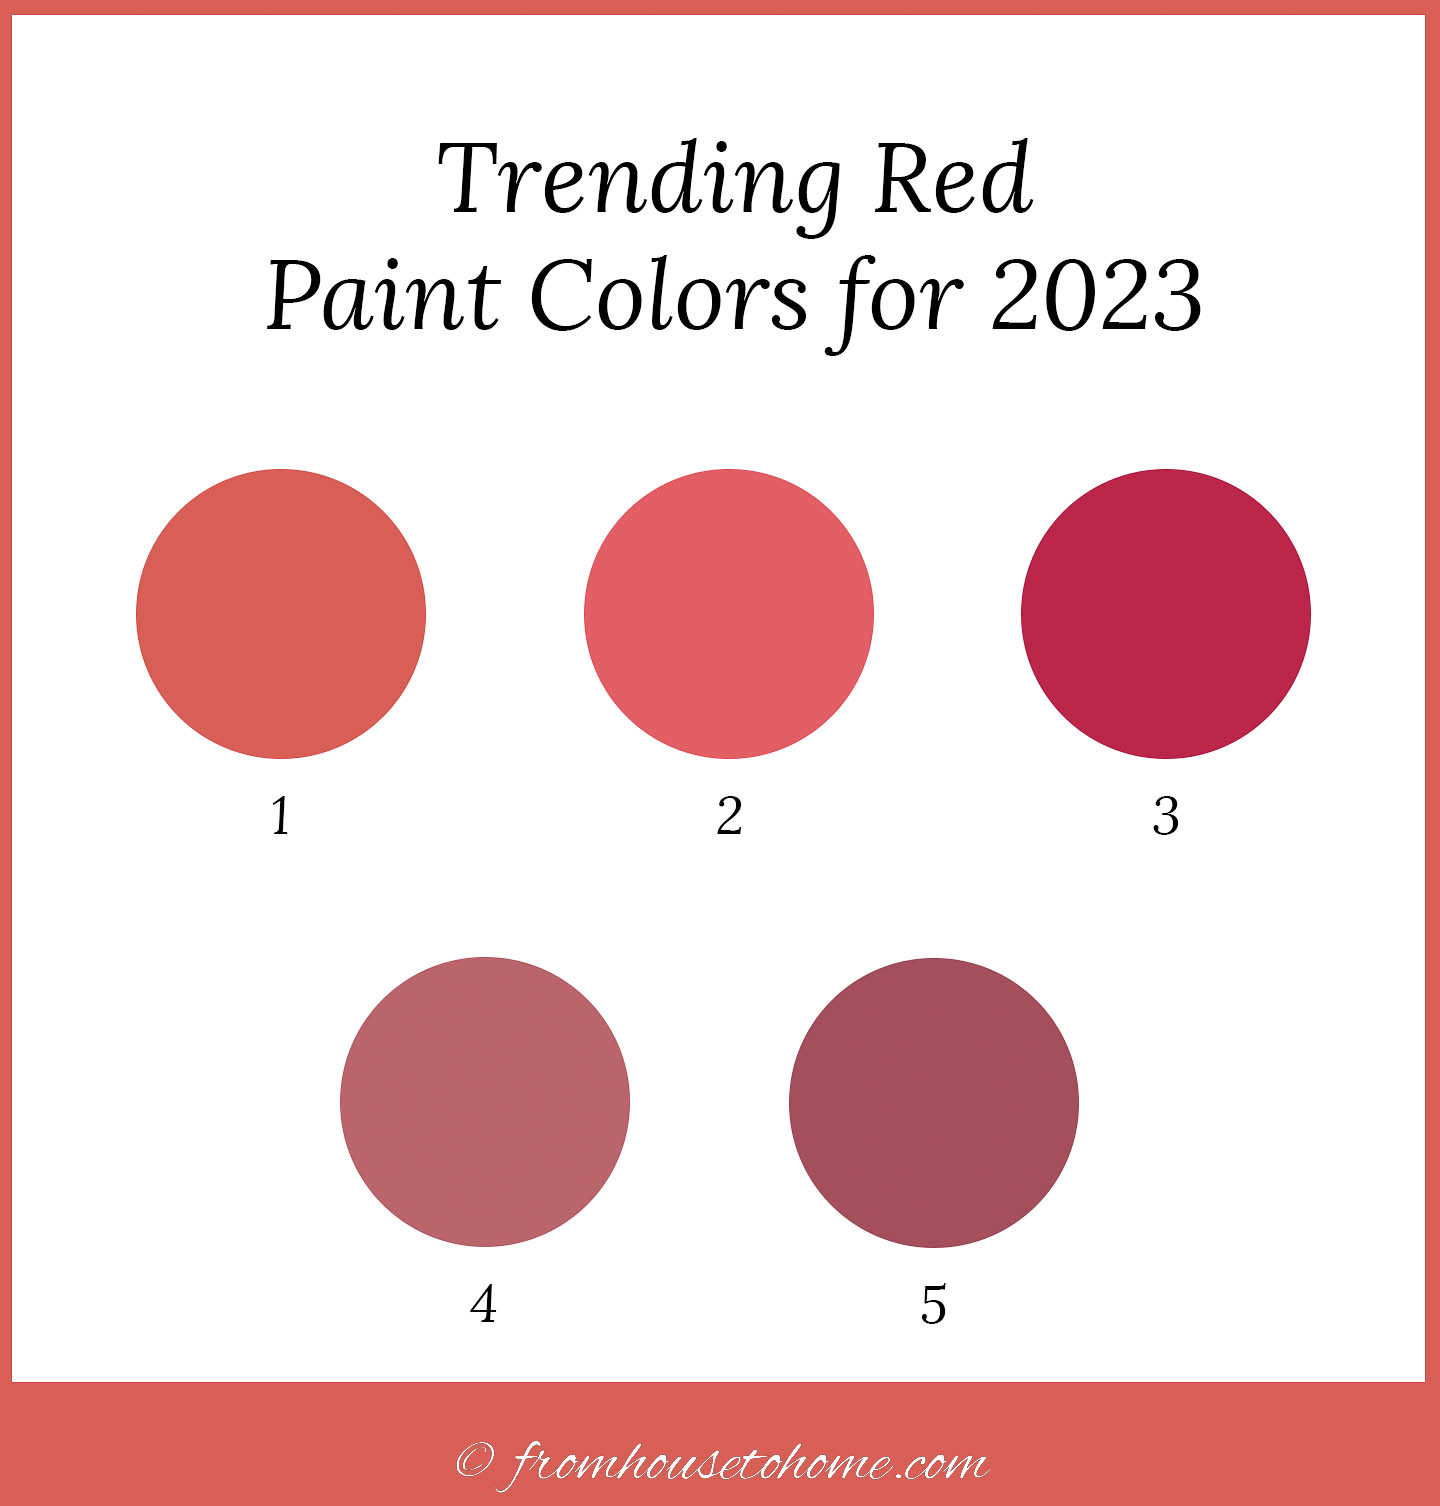 Swatches of the 2023 trending red paint colors